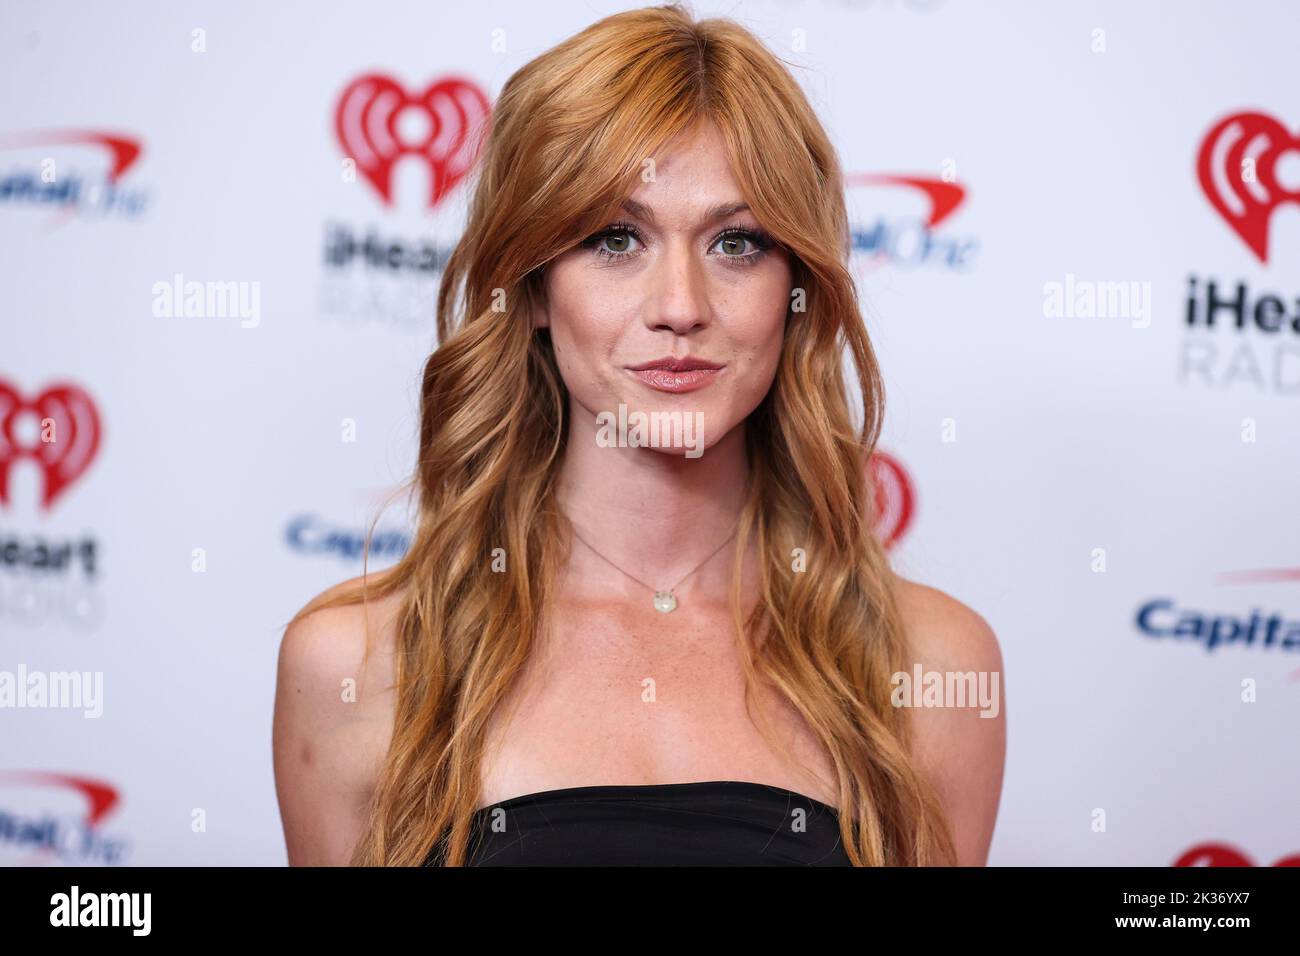 LAS VEGAS, NEVADA, USA - SEPTEMBER 24: Katherine McNamara poses in the press room at the 2022 iHeartRadio Music Festival - Night 2 held at the T-Mobile Arena on September 24, 2022 in Las Vegas, Nevada, United States. (Photo by Xavier Collin/Image Press Agency) Stock Photo